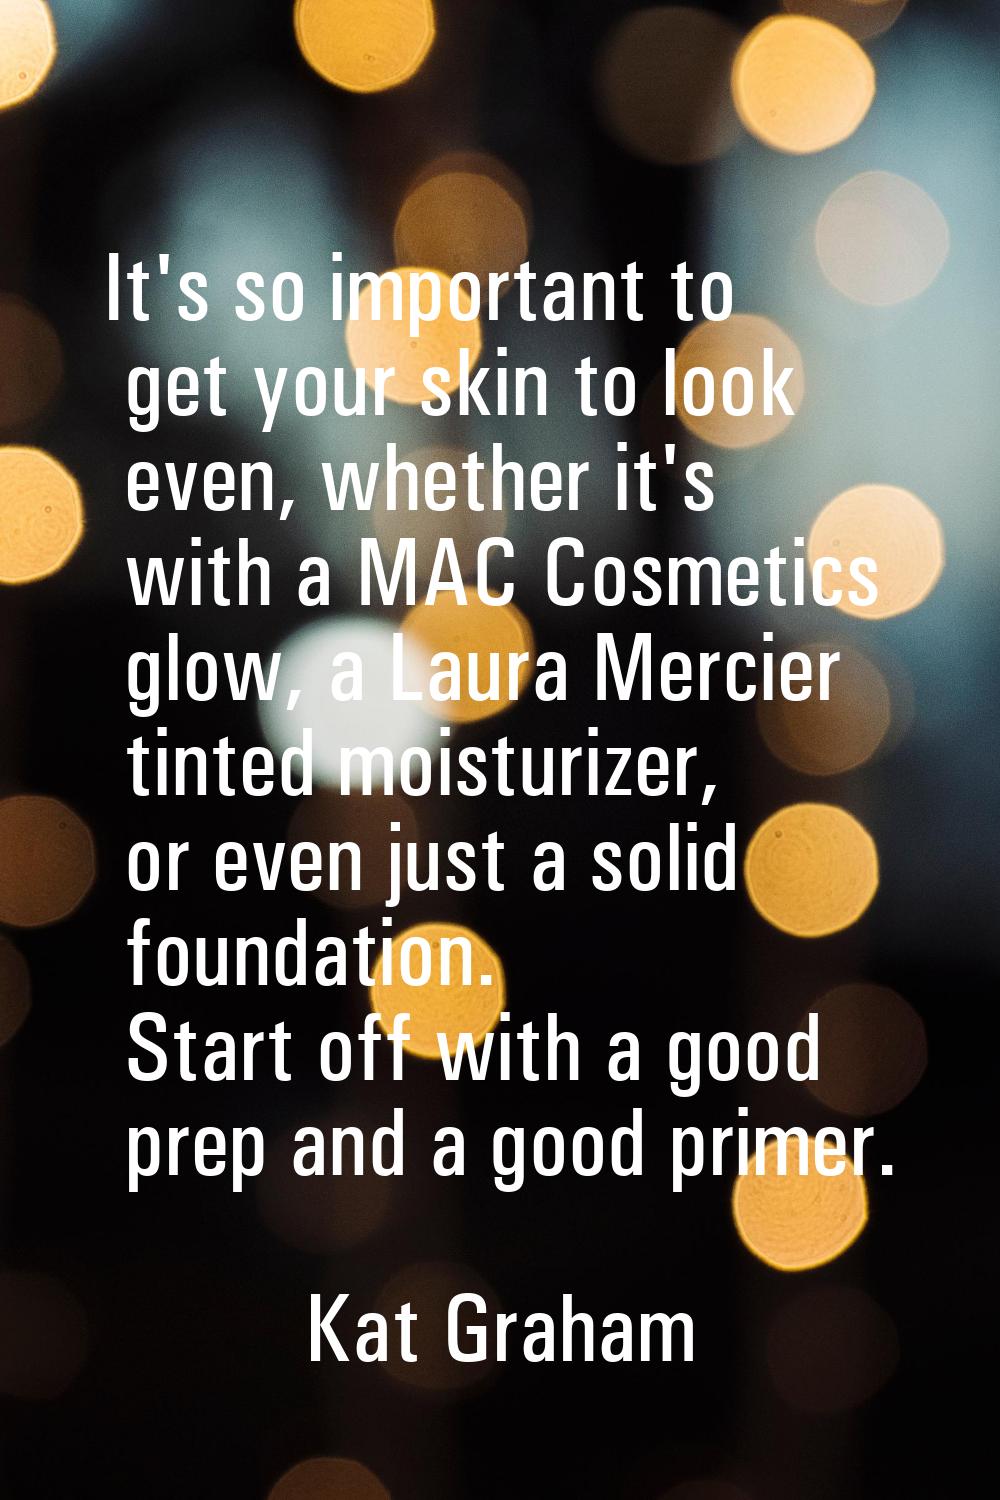 It's so important to get your skin to look even, whether it's with a MAC Cosmetics glow, a Laura Me